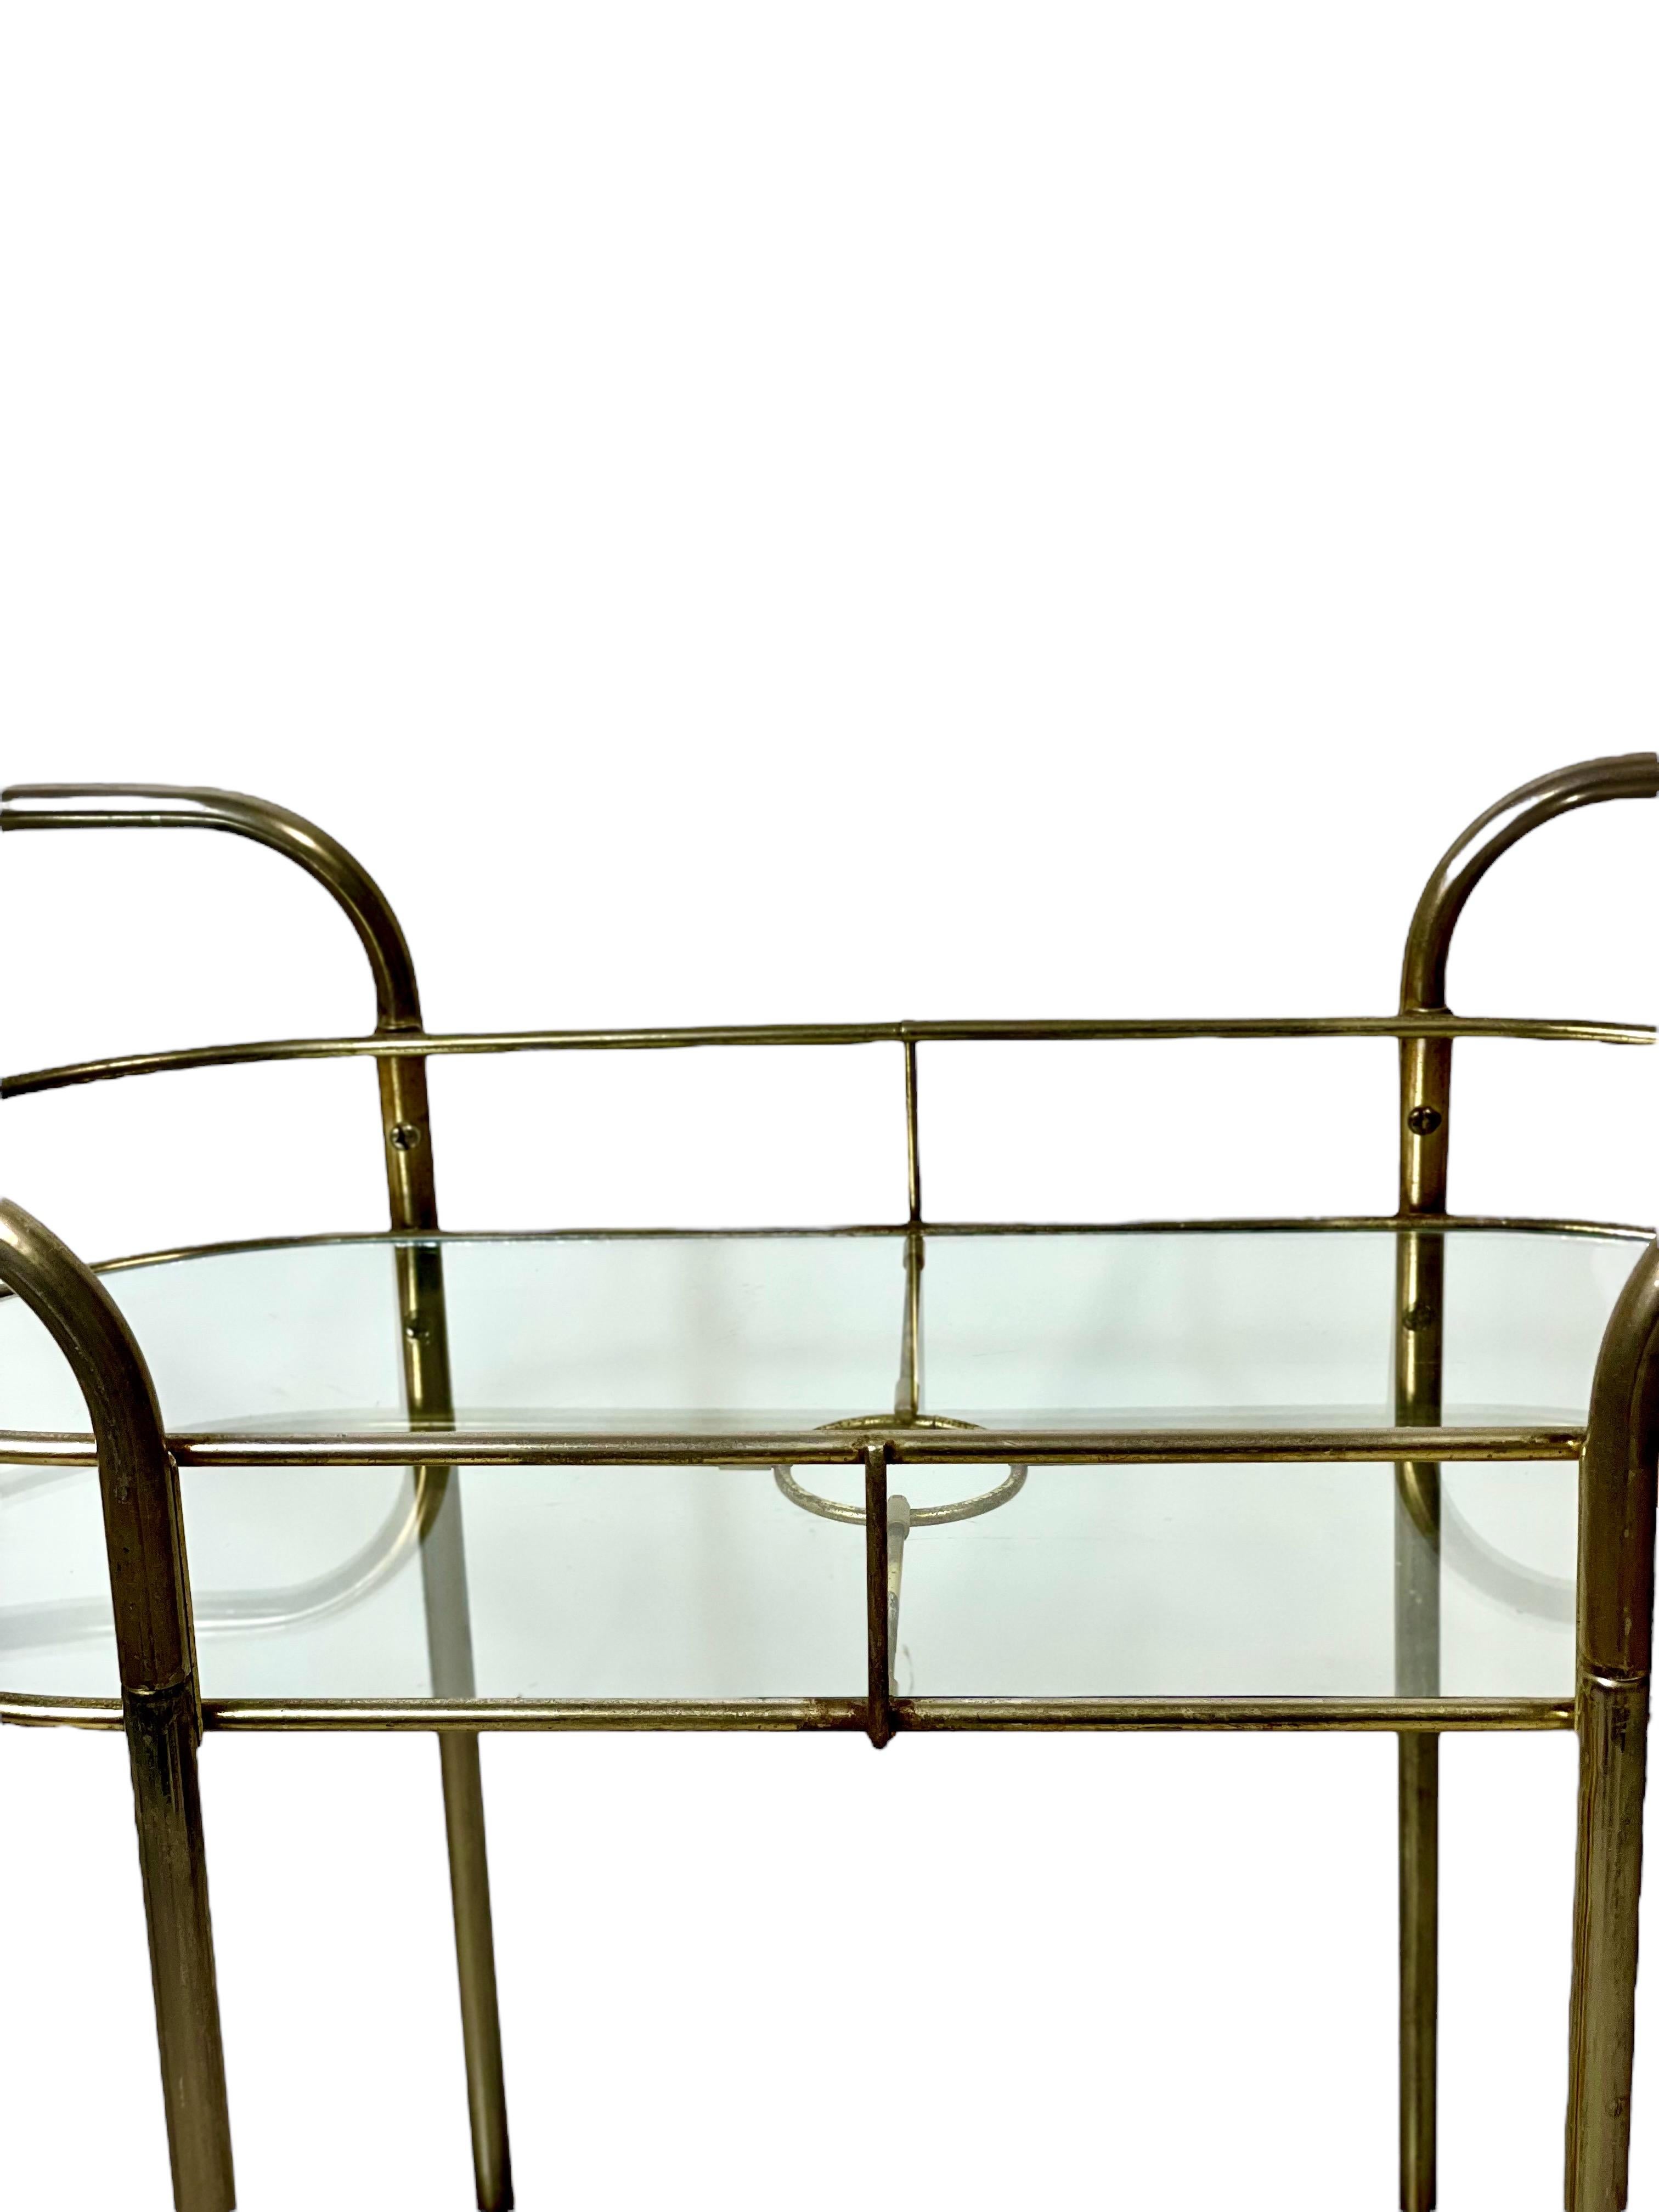 A very chic 1960s bar cart, or drinks serving trolley, featuring a light and dynamic two-tier structure made from tubular chrome. Oval-shaped inset smoked glass shelves echo the elegant shape of the frame, while swivel castors and stylish push